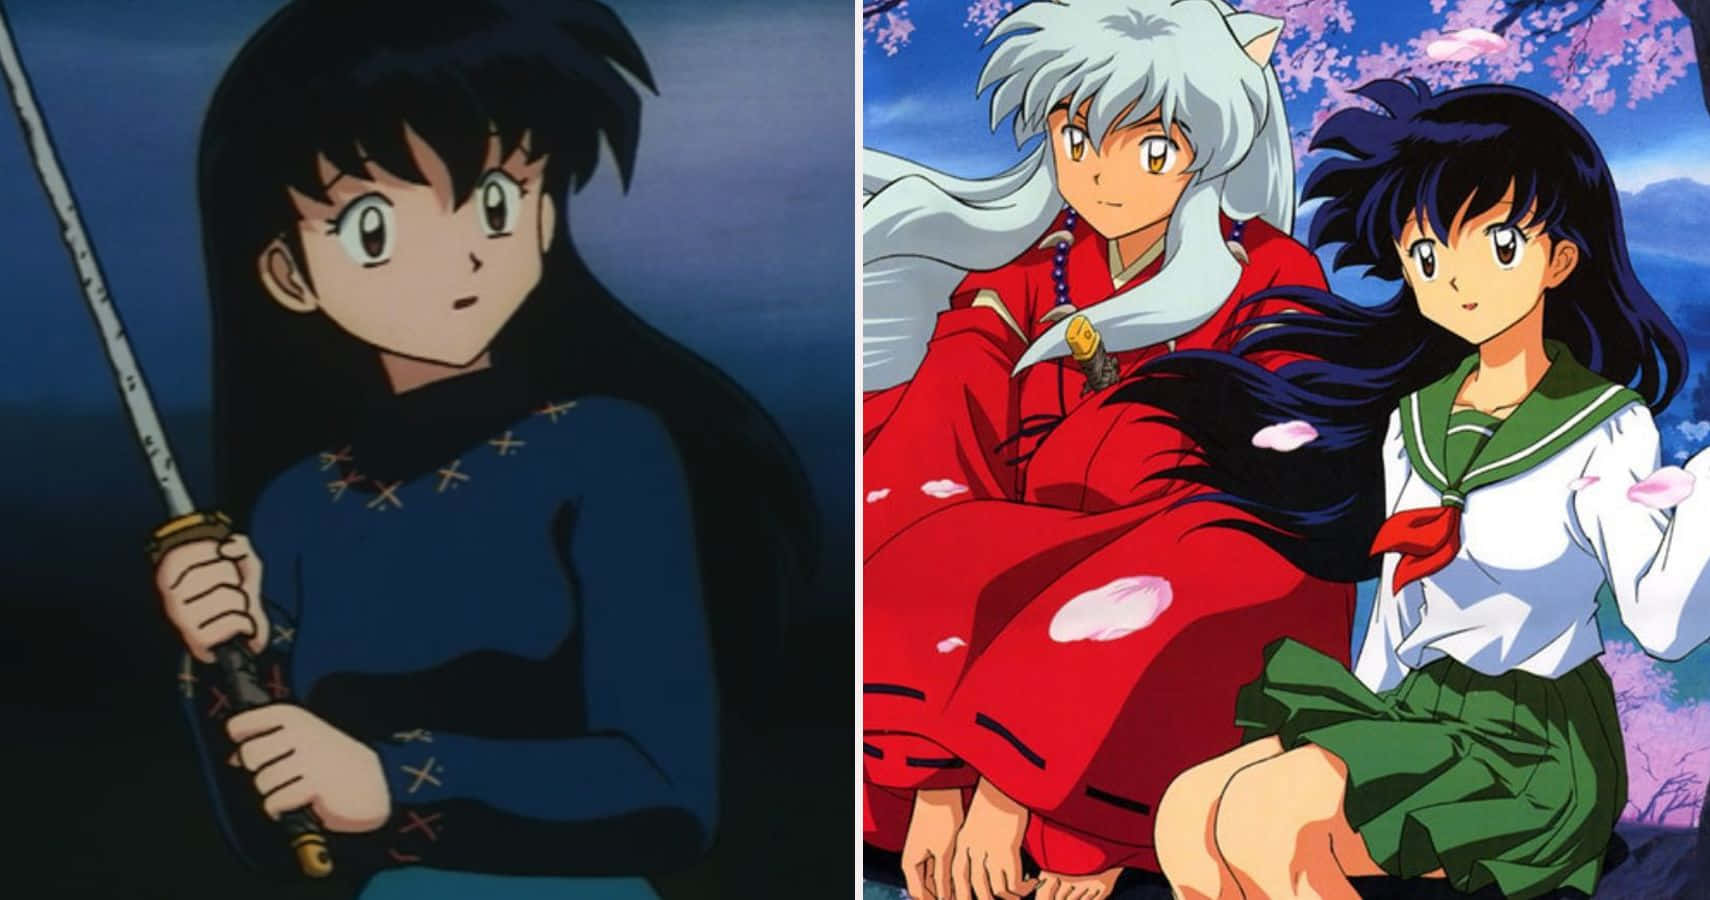 Inuyasha and Kagome embracing in a touching moment of love and friendship Wallpaper